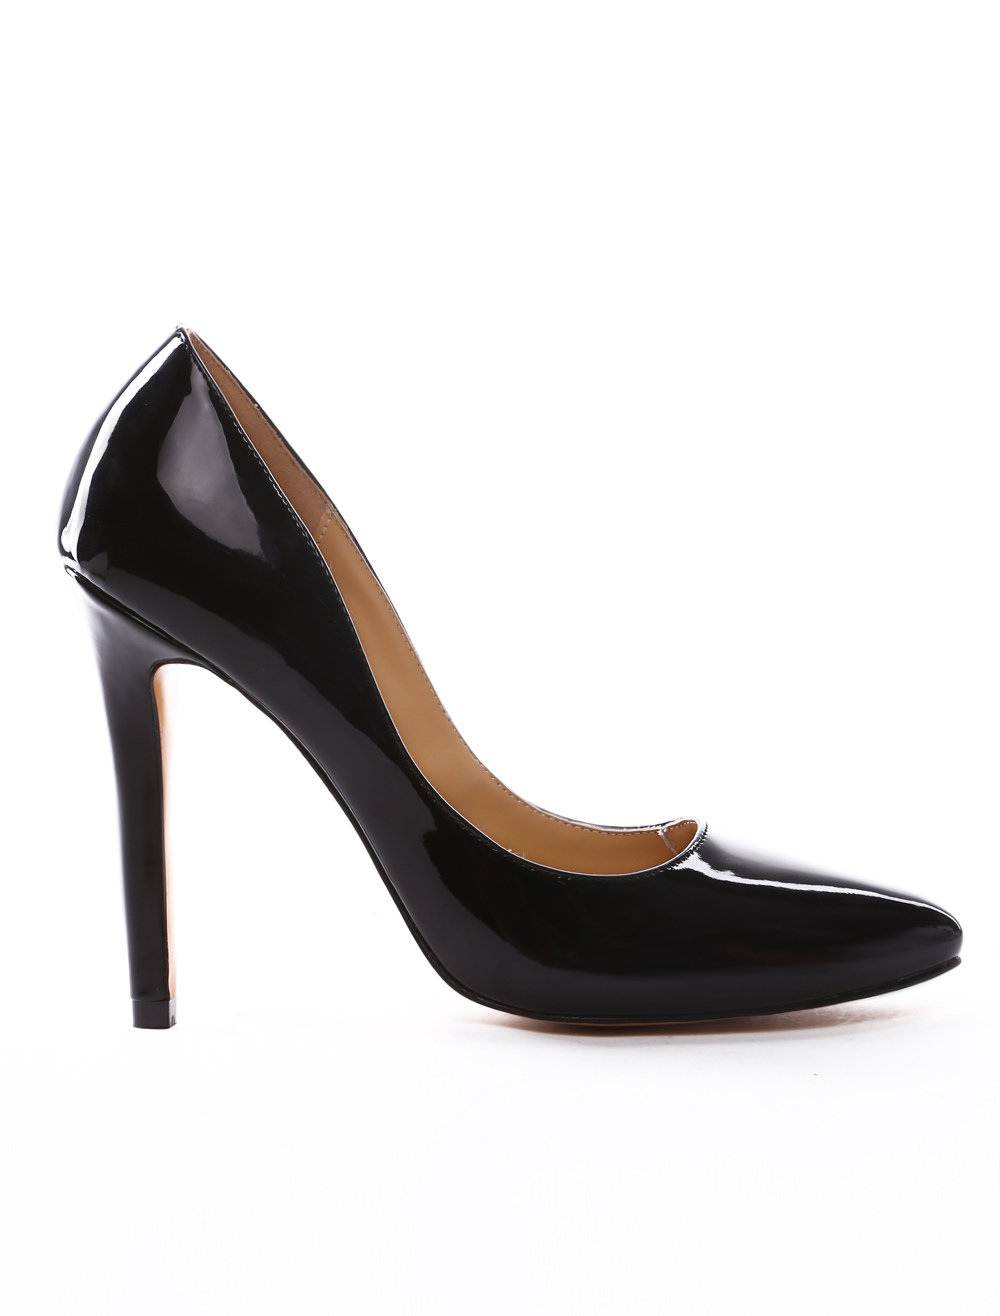 Pointed Toe Patent Leather Woman's Pumps - Milanoo.com